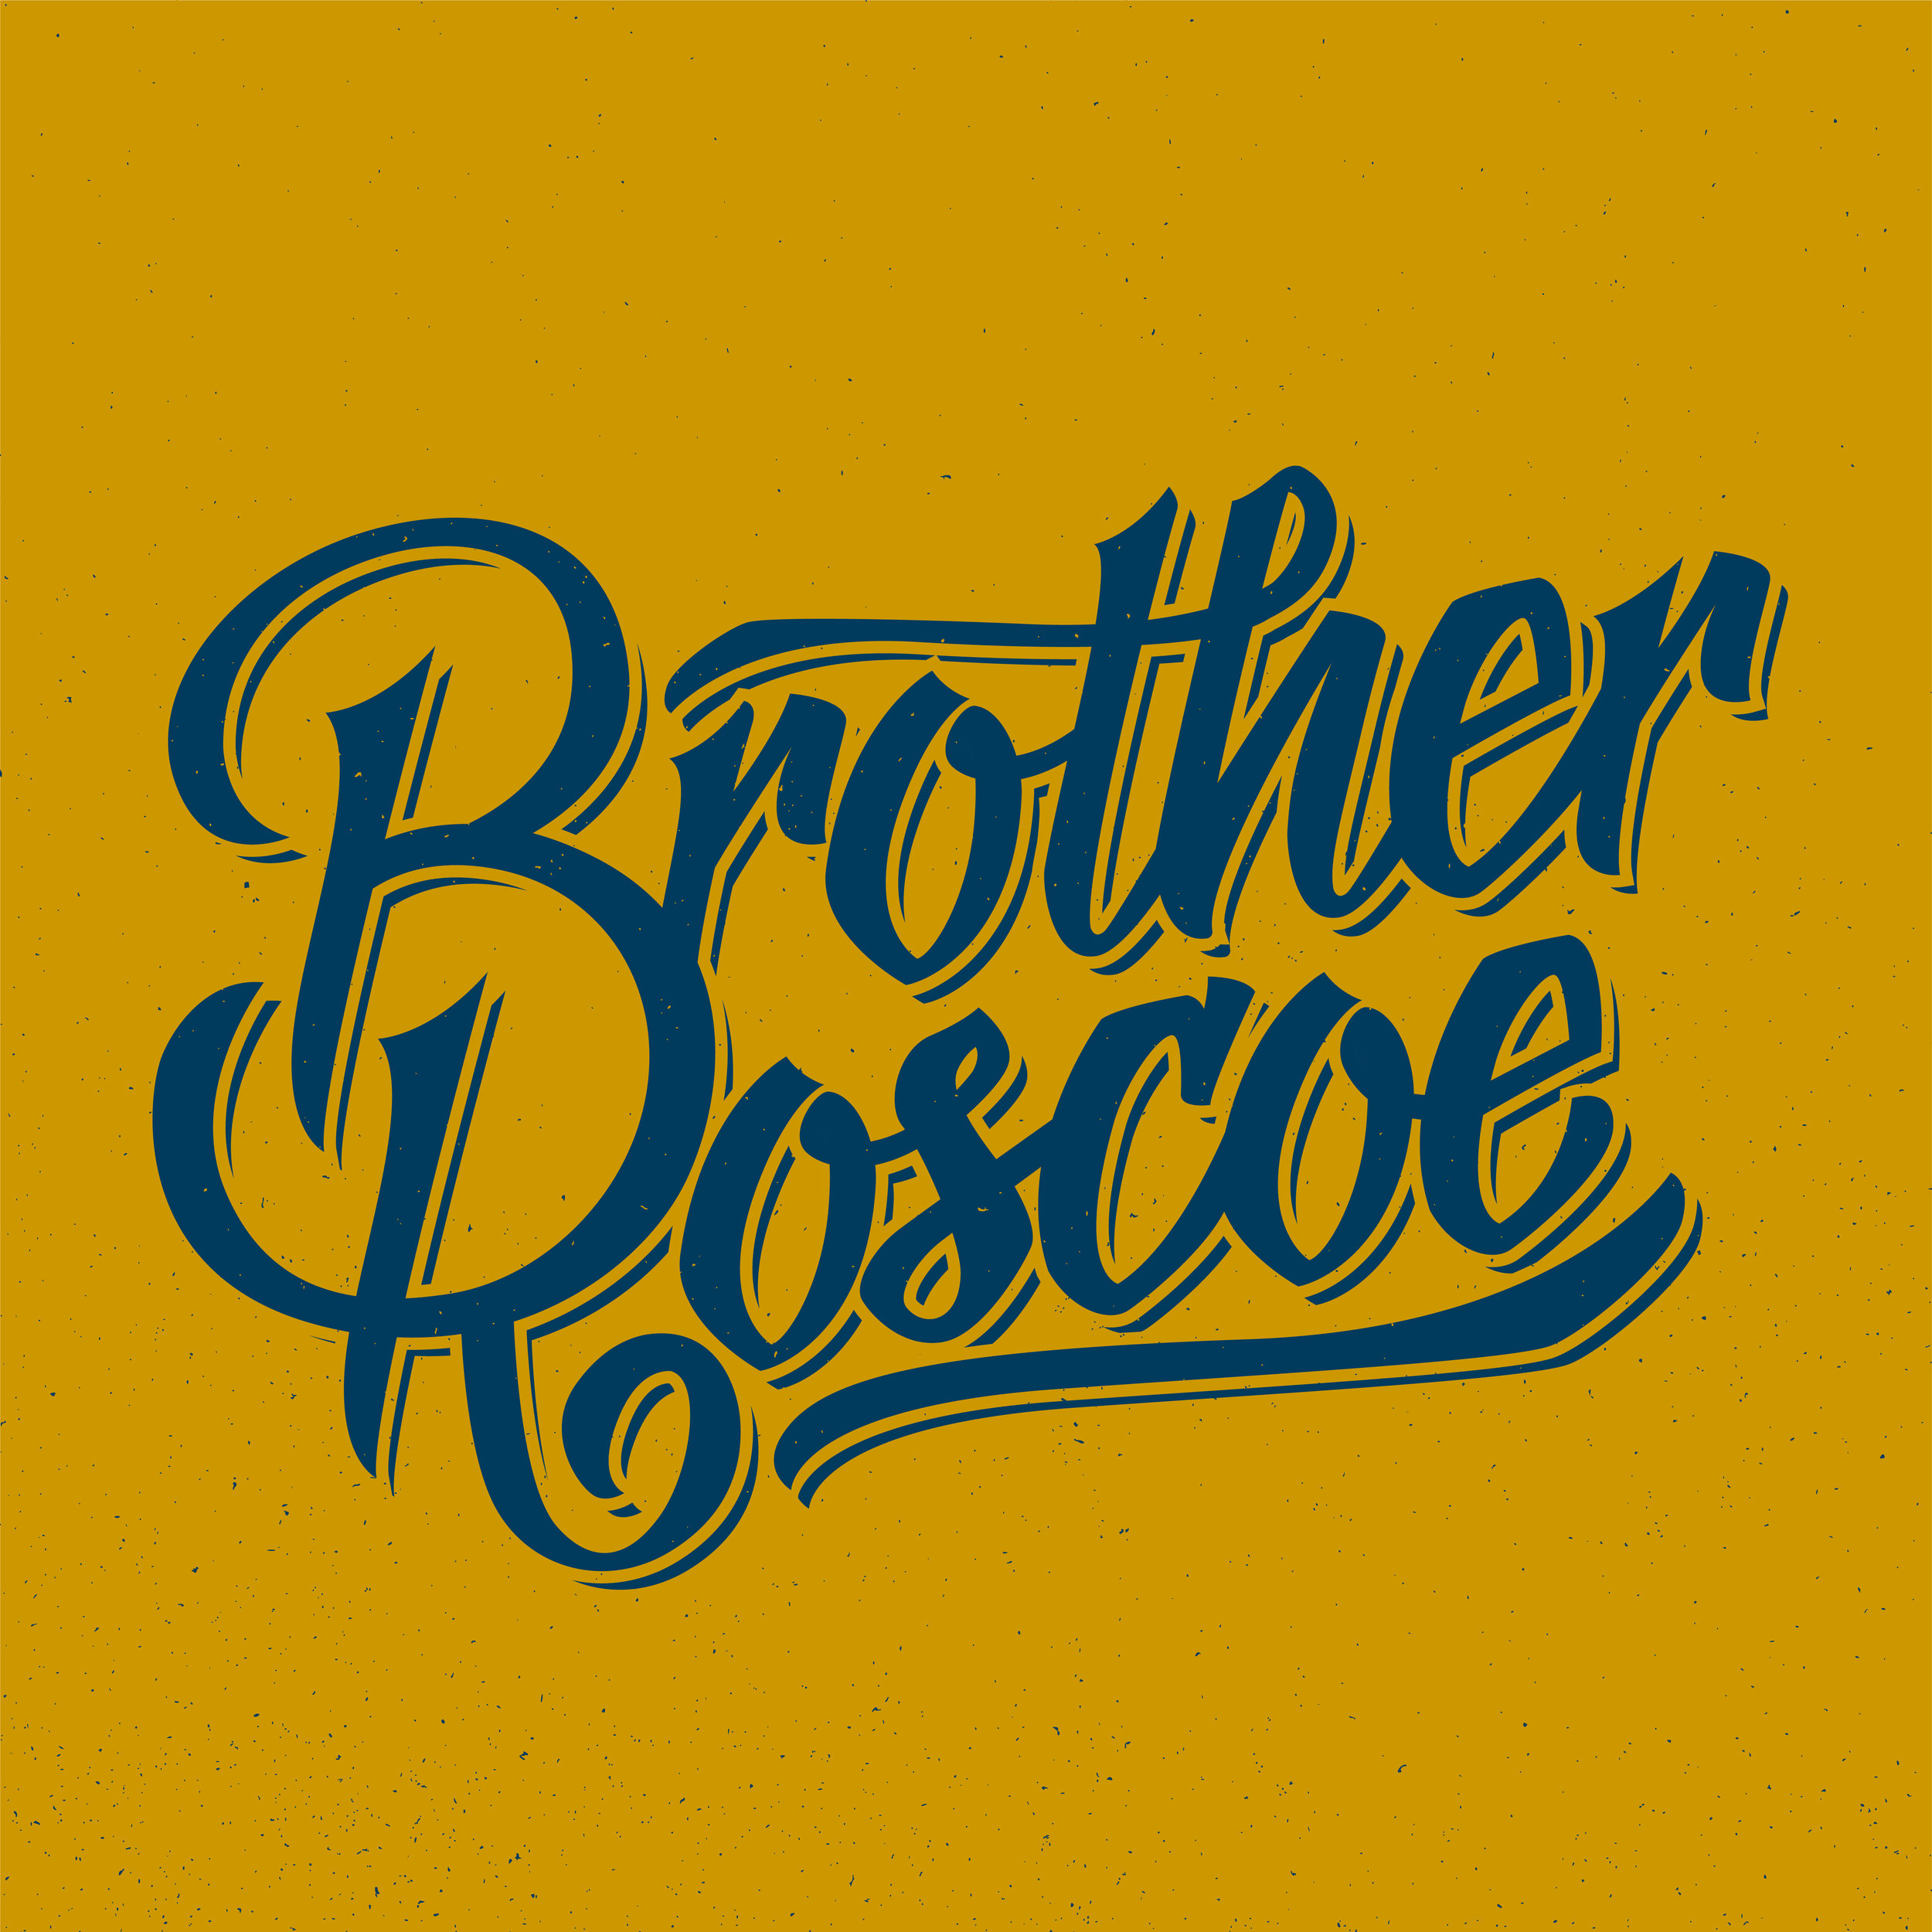 Brother Roscoe IG Color_1.jpg